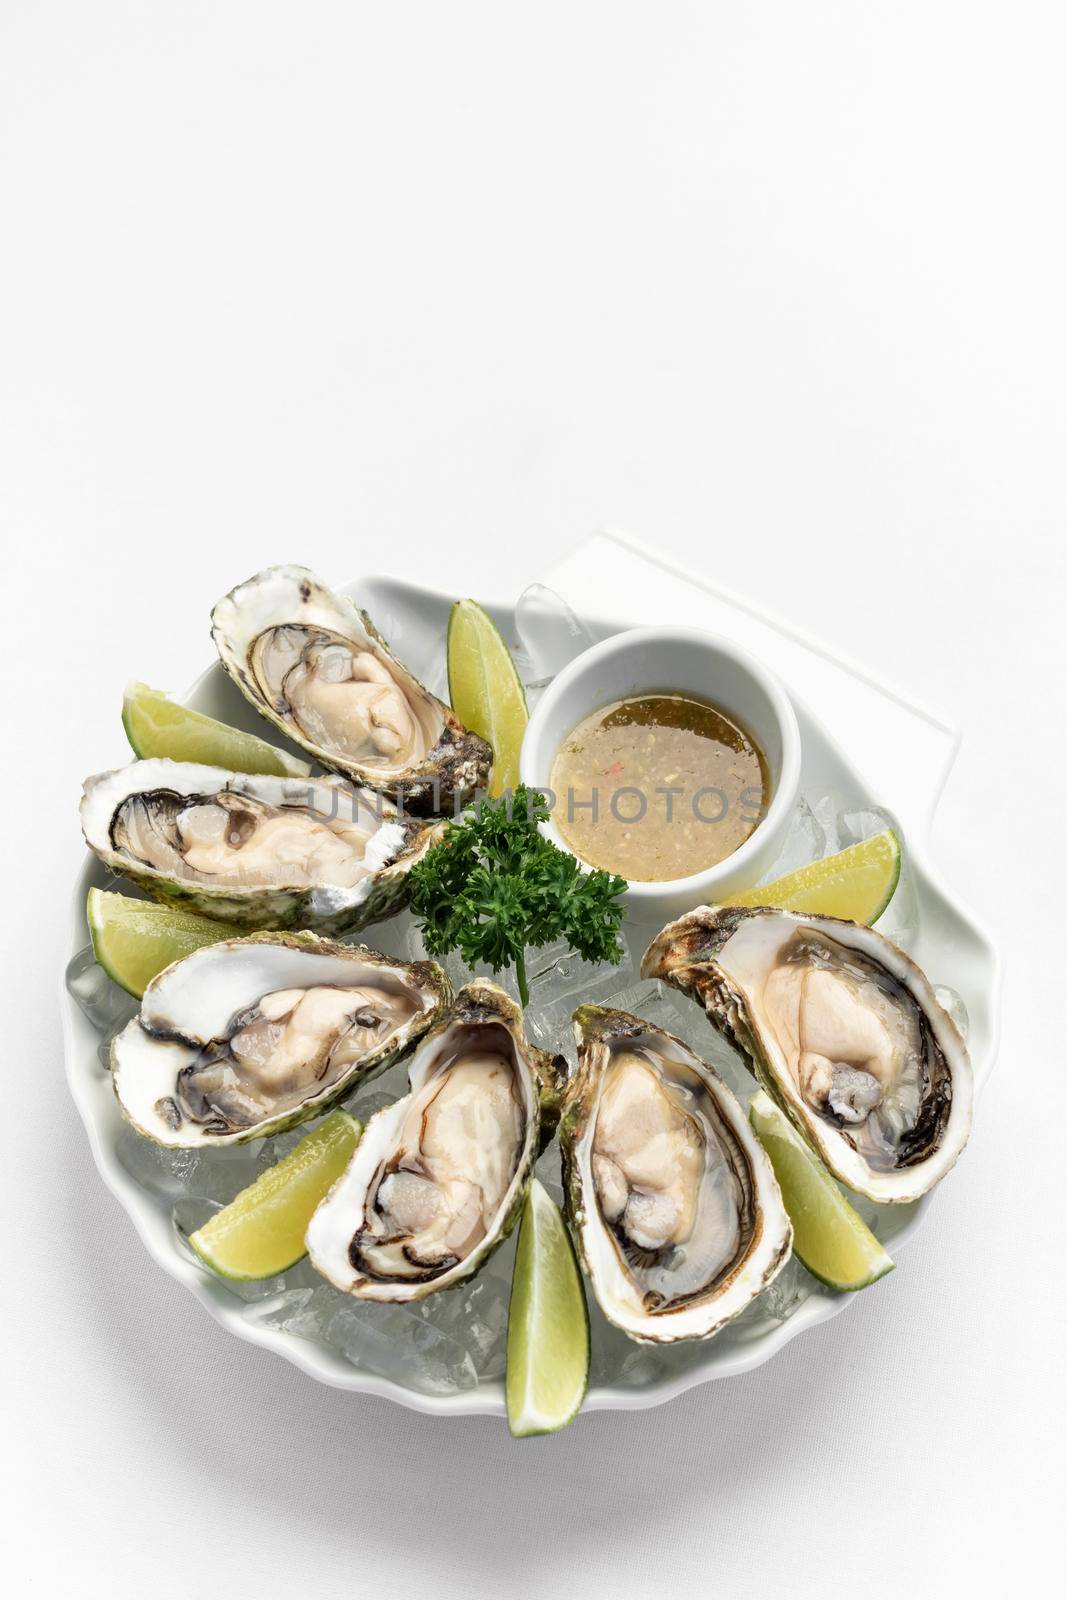 Six fresh oysters with lime wedges and spicy chilli sauce by jackmalipan